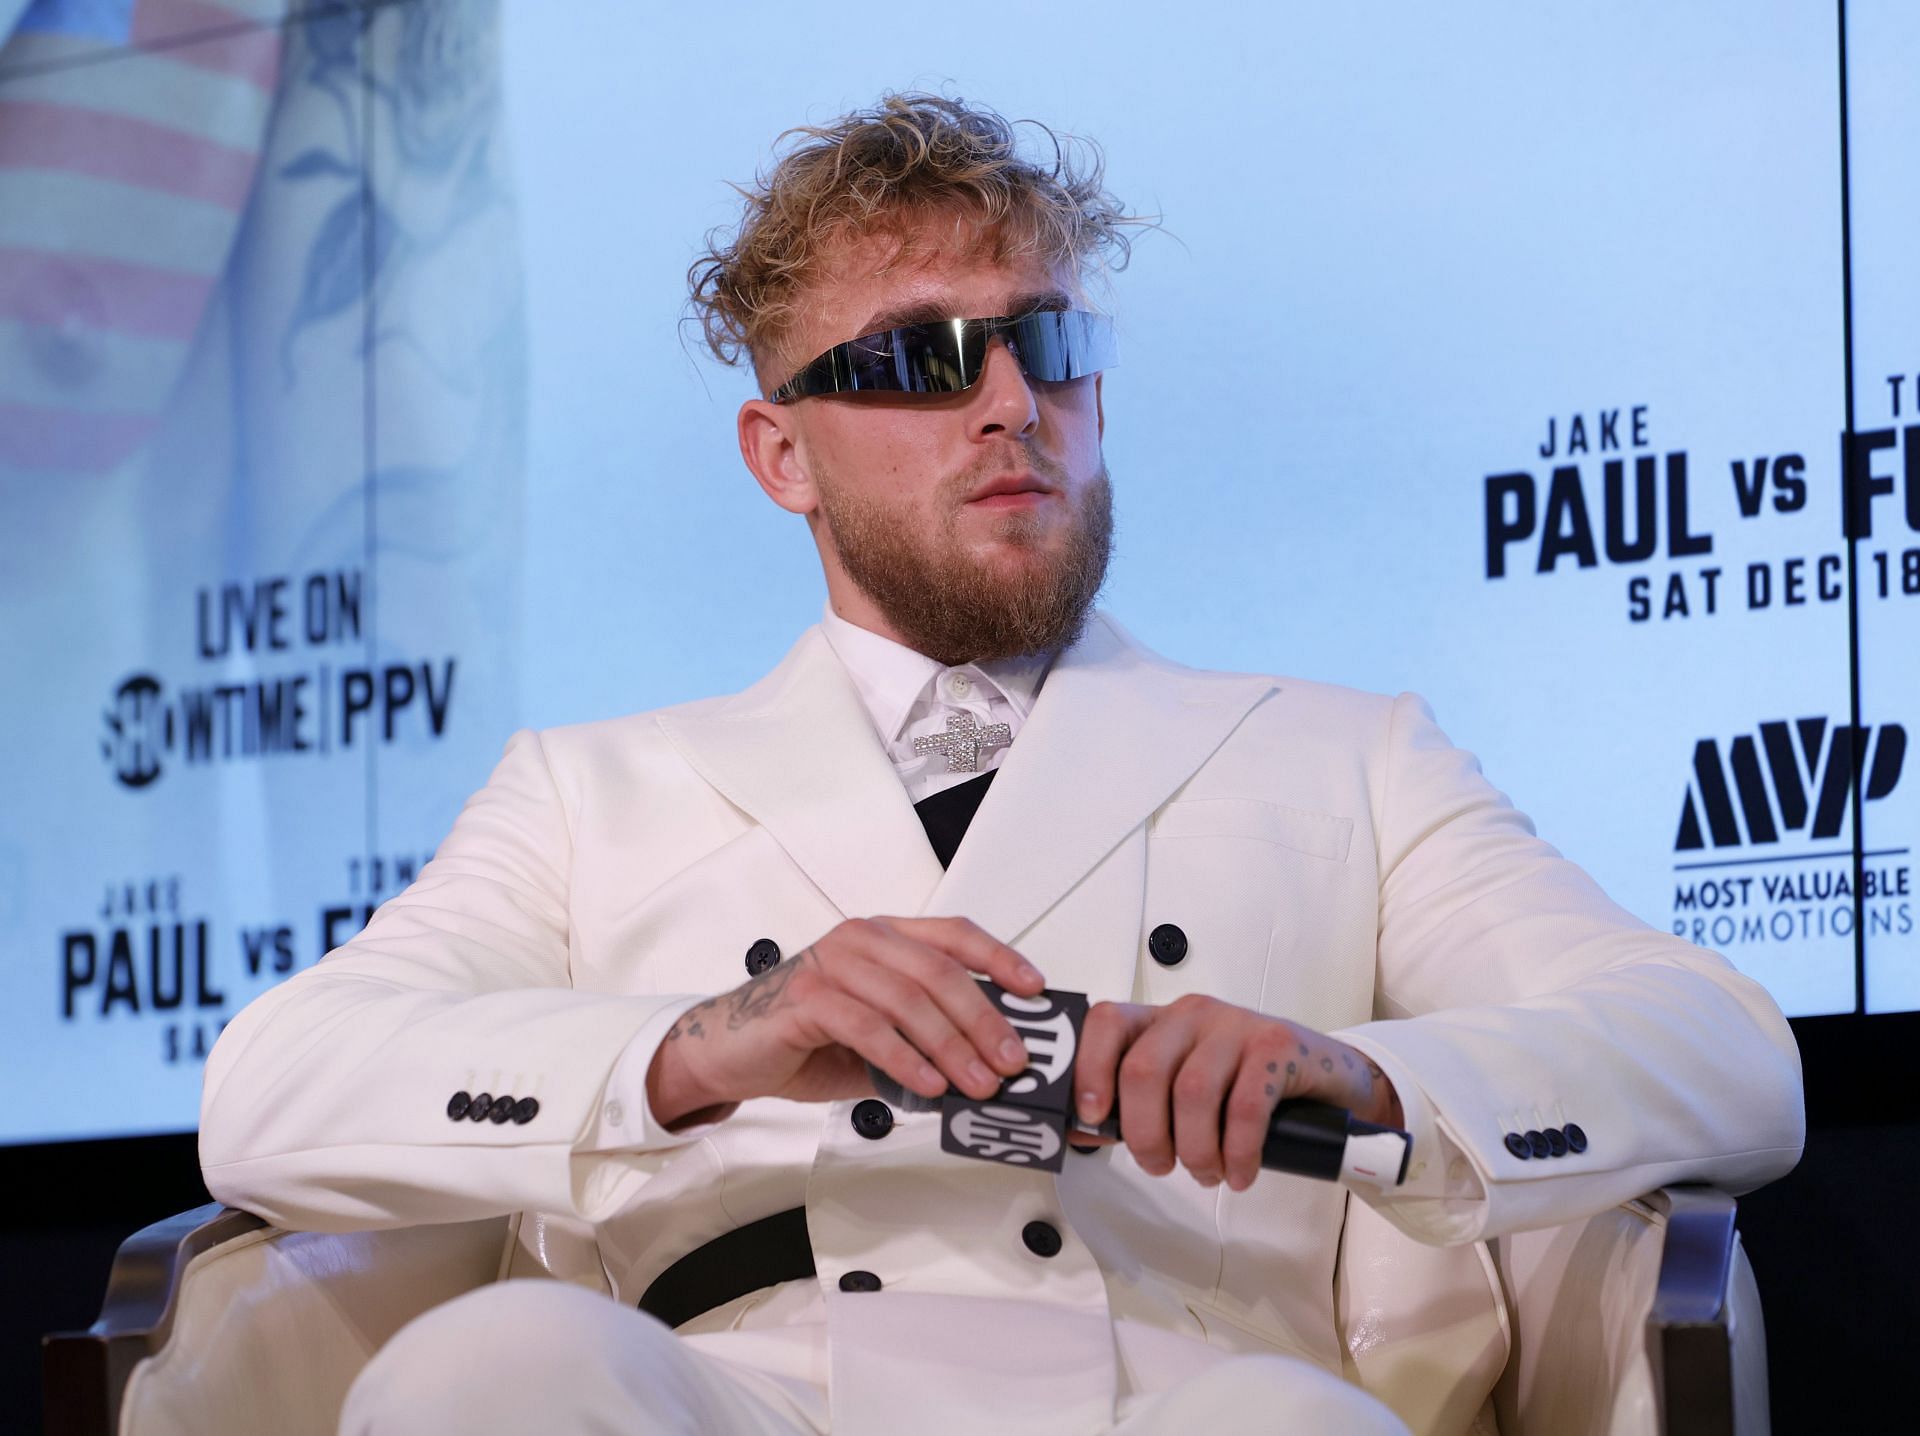 Jake Paul has continually attempted to anger Dana White in the past few months